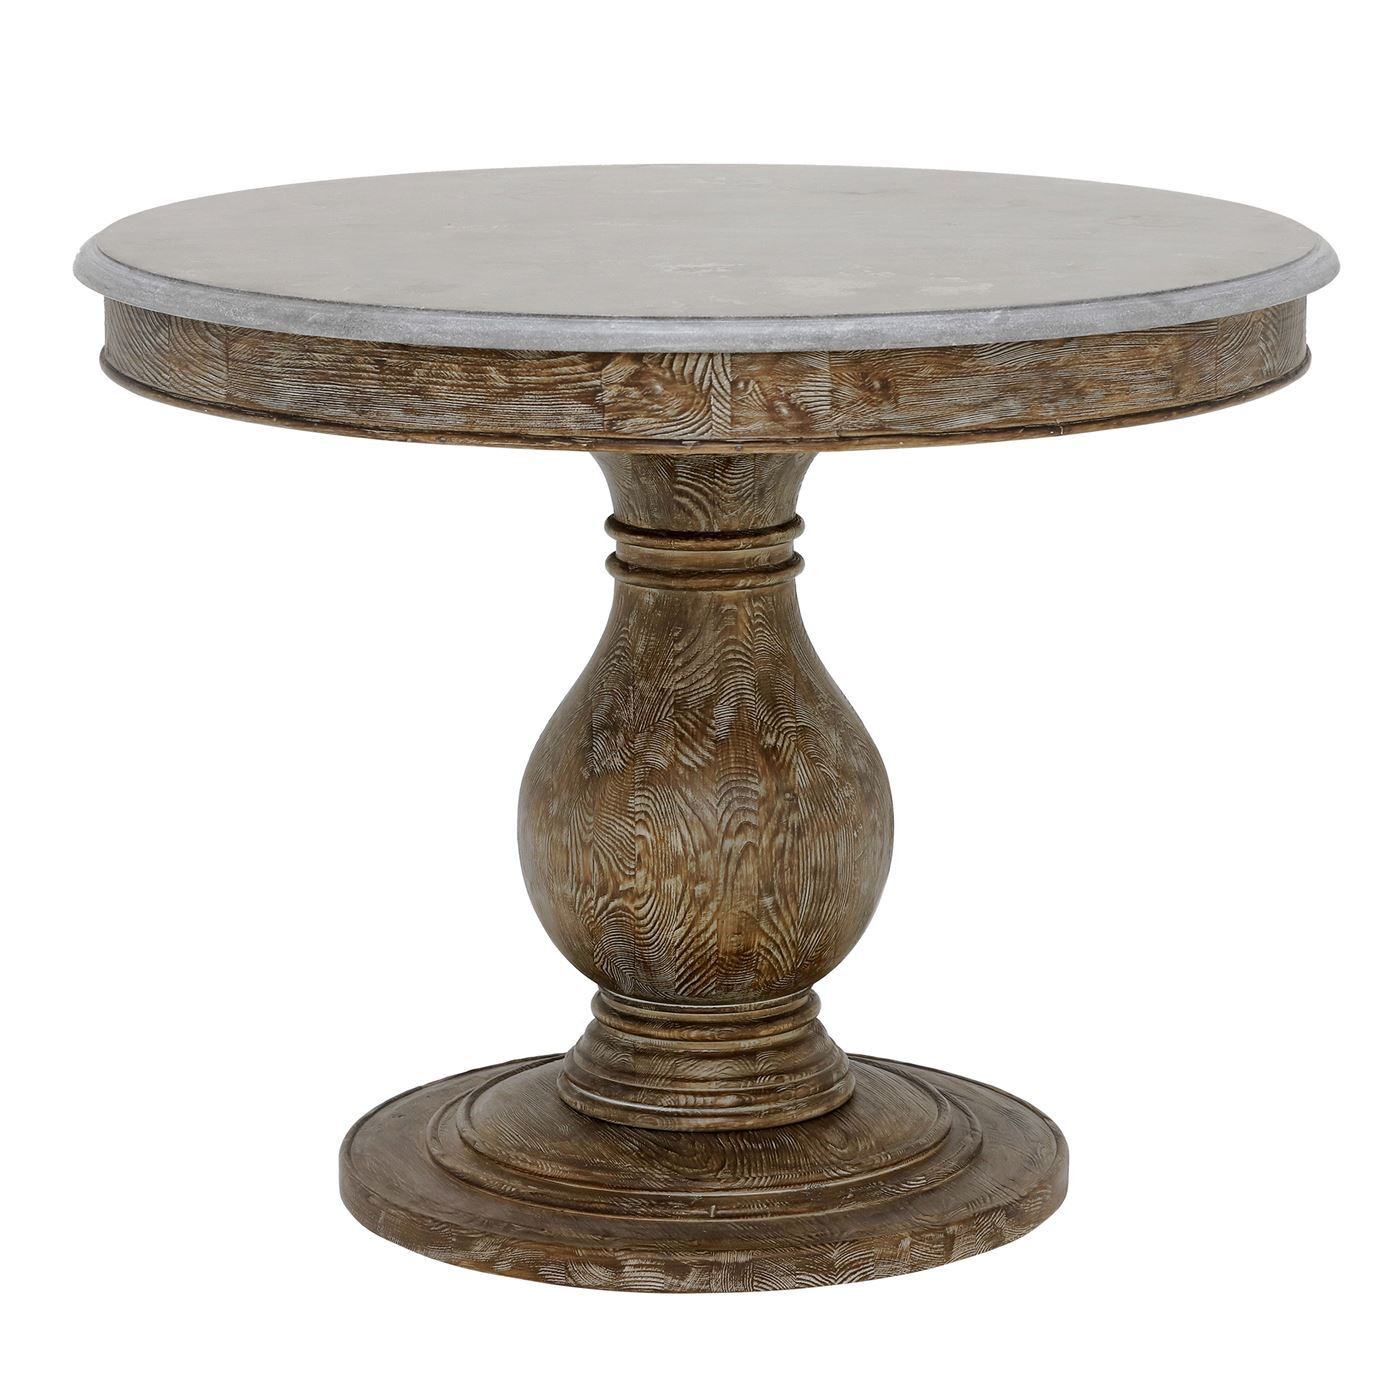 Woolton 100cm Round Dining Table, Blue Stone - W100cm - Barker & Stonehouse